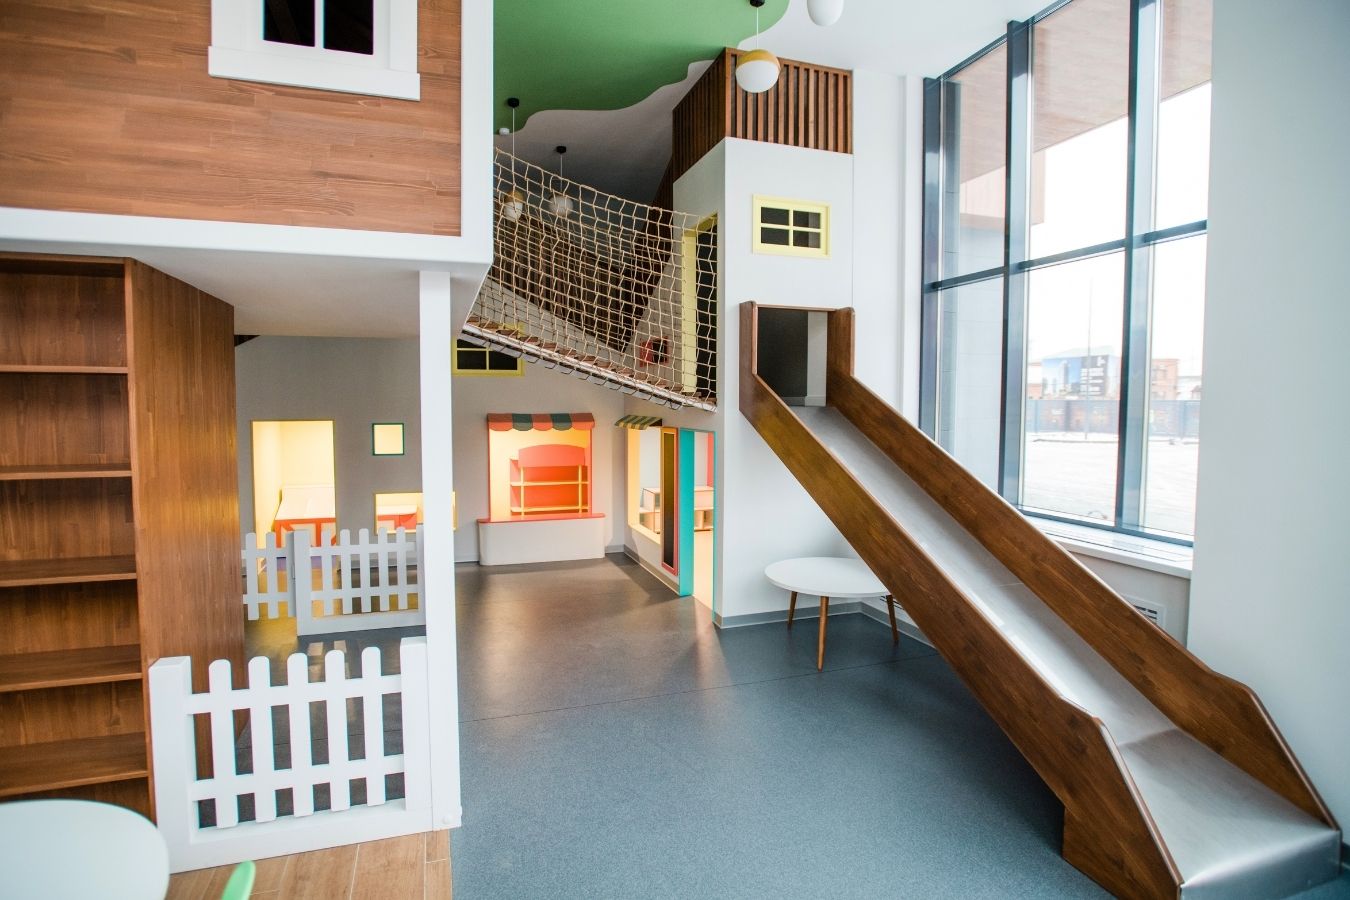 Mind Blowing Montessori Playroom with Giant Slide